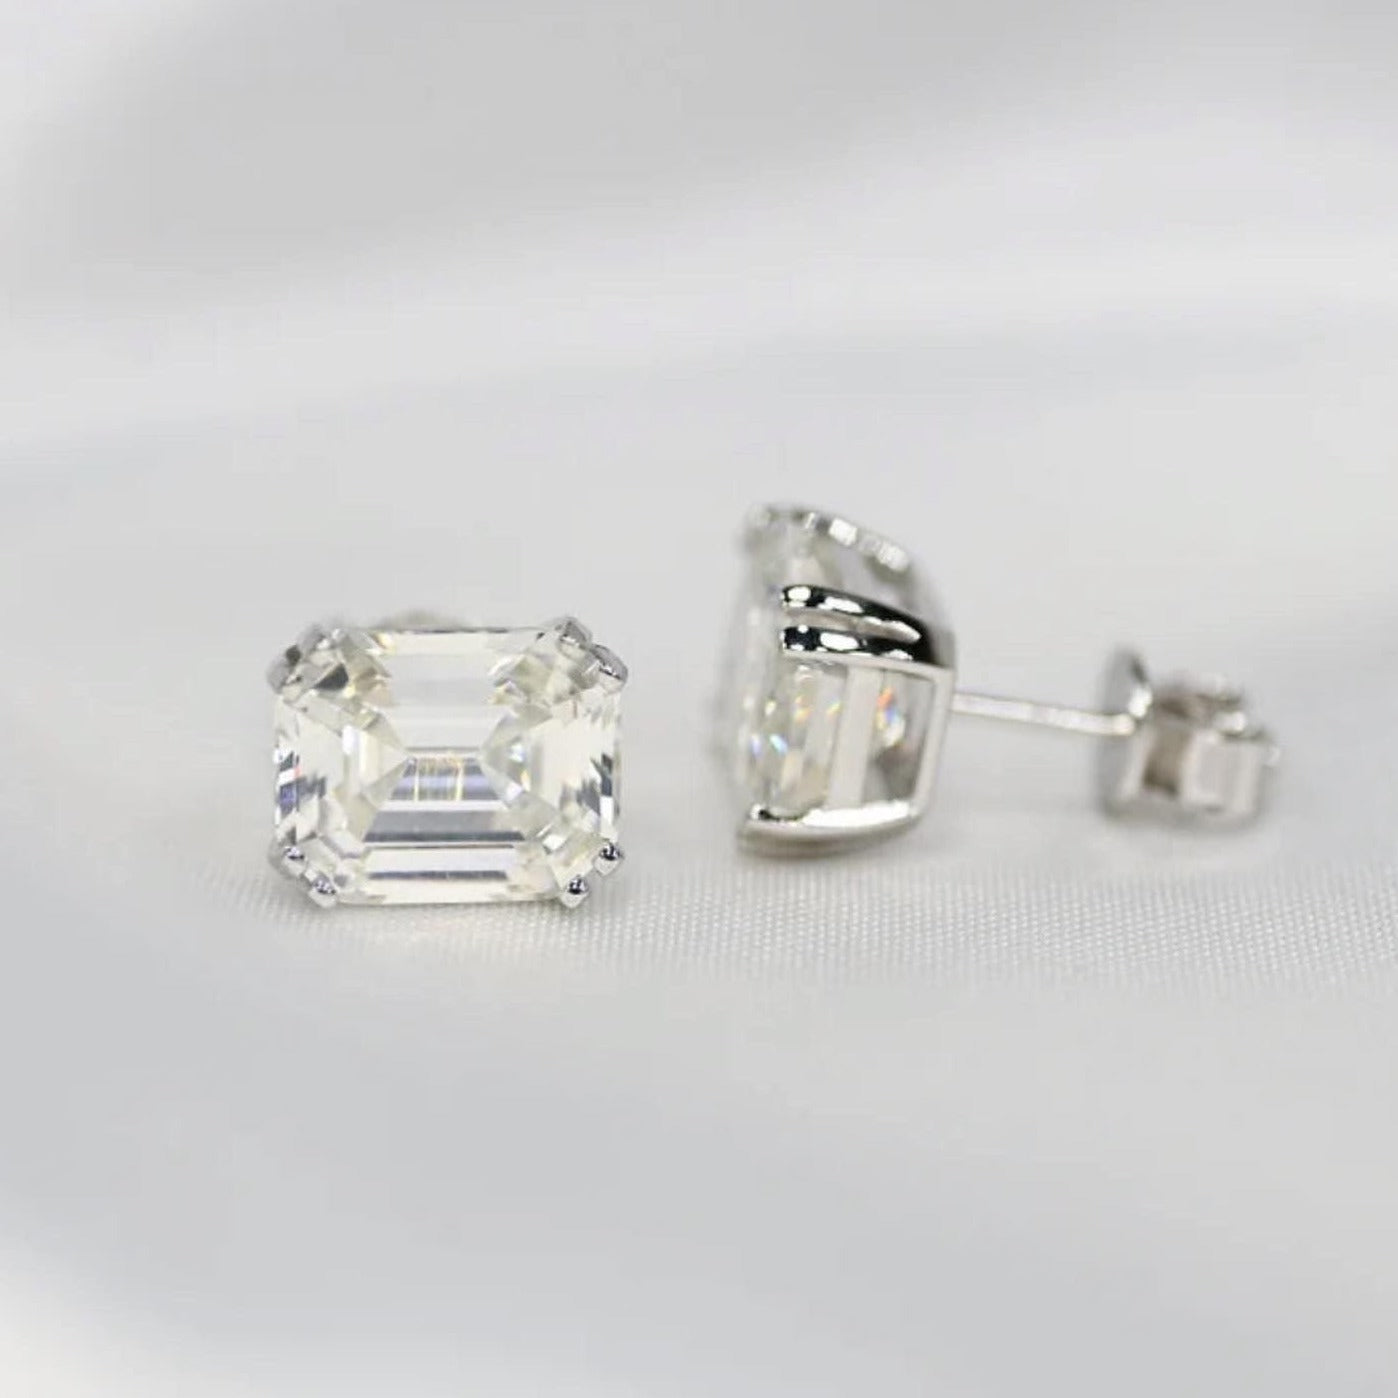 Our timeless, Emerald cut, sterling silver studs weighing 3 carats each, 8mm x 10mm stones. Our beautiful earrings are an elegant option for bridal jewellery or a special anniversary gift! Boxed and ready to go, these diamond earrings enhance any outfit by Margalit Rings